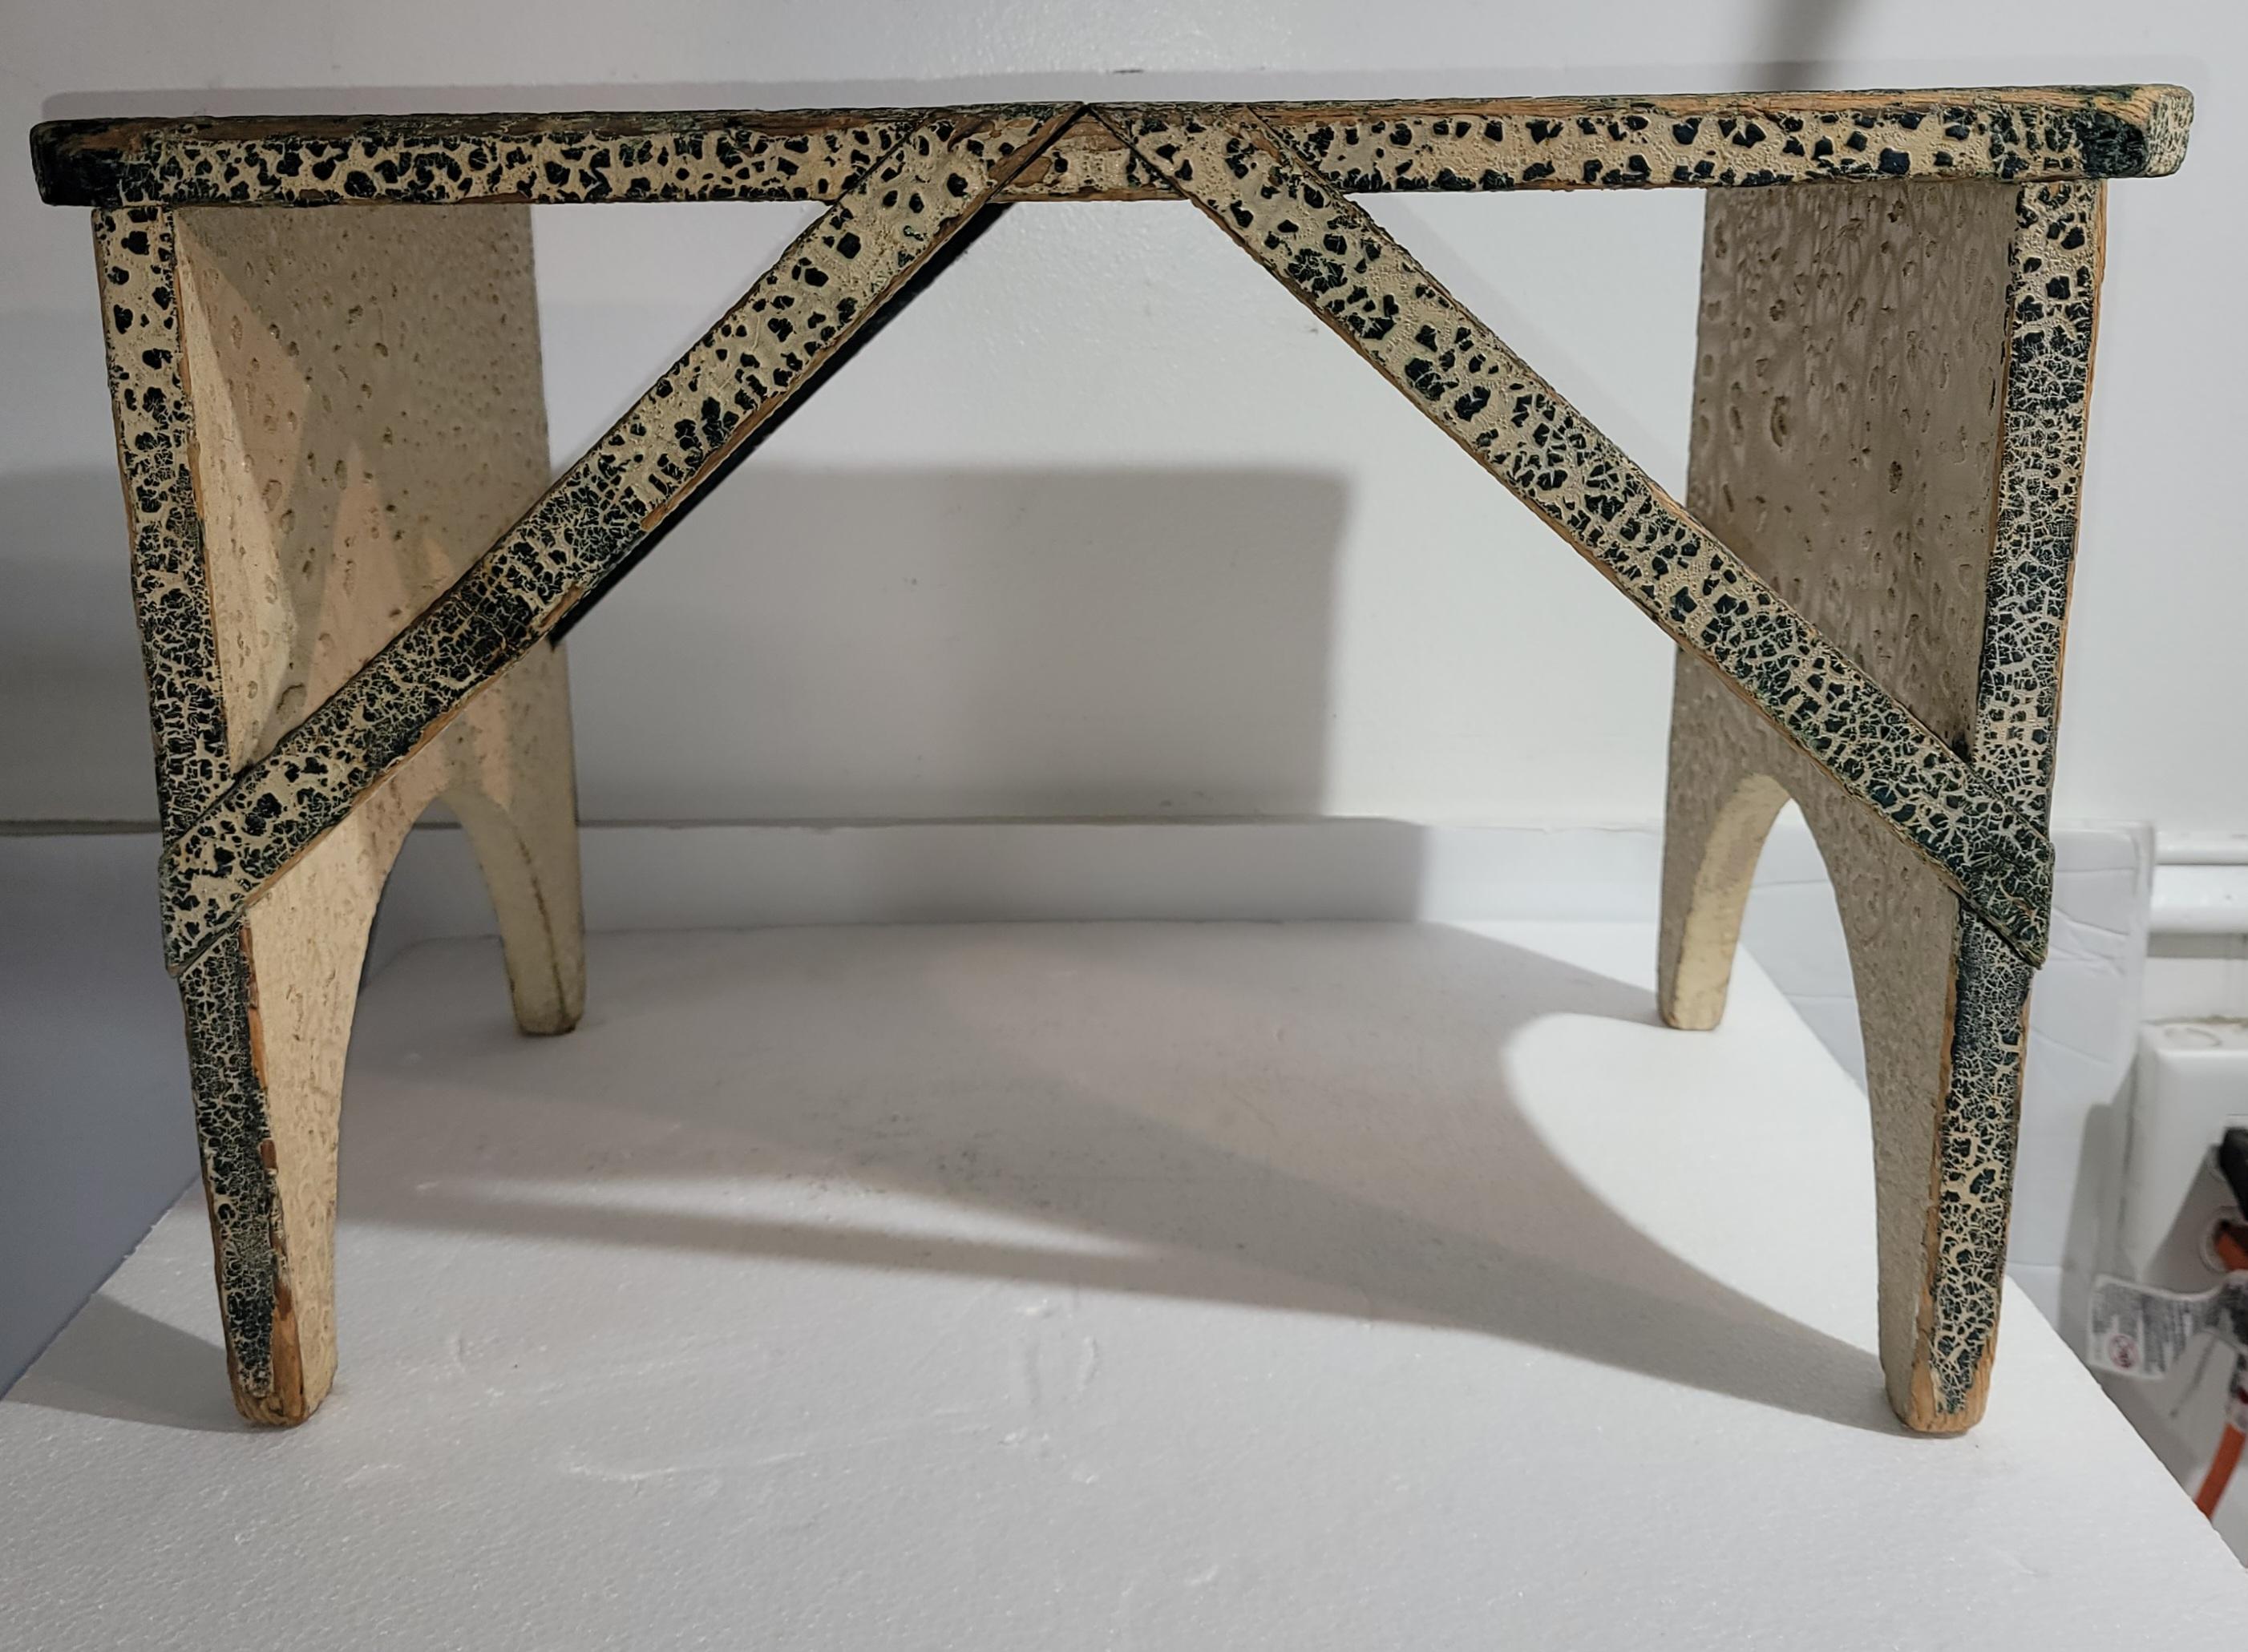 19Thc Original cream painted foot stool or small bench in amazing crackle painted surface.Cream over green painted surface.This stool is all mortised and square nail construction. Great sturdy condition.